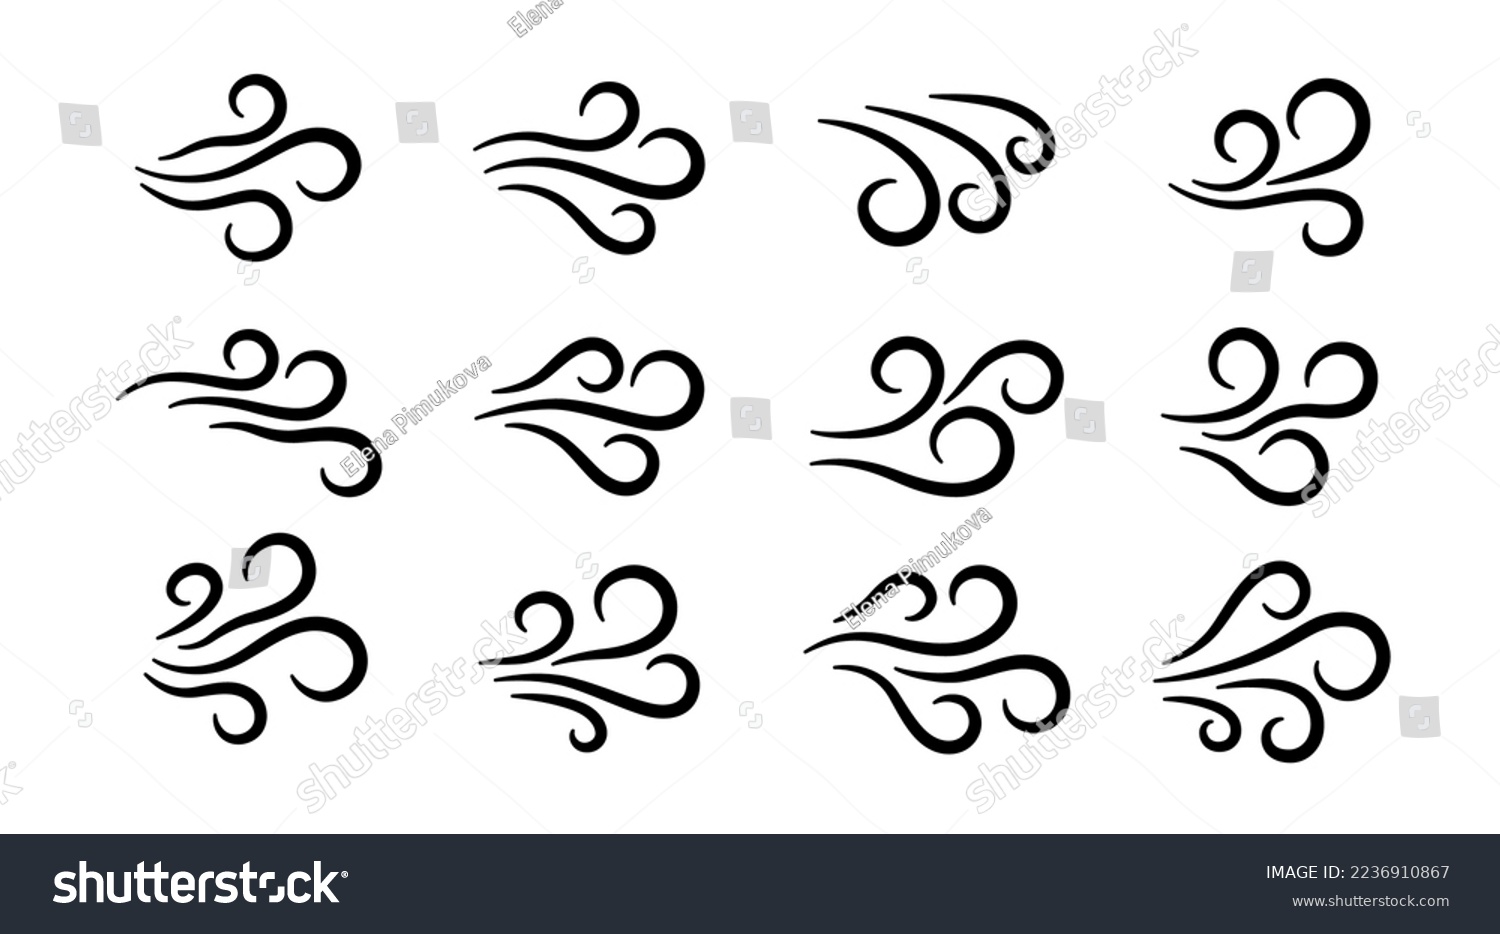 SVG of Hand drawn wind air flow icon set. Free breath symbol. Fresh air flow sign. Doodle wind blow icons collection. Weather symbol. Climate design element. Vector illustration isolated on white background. svg